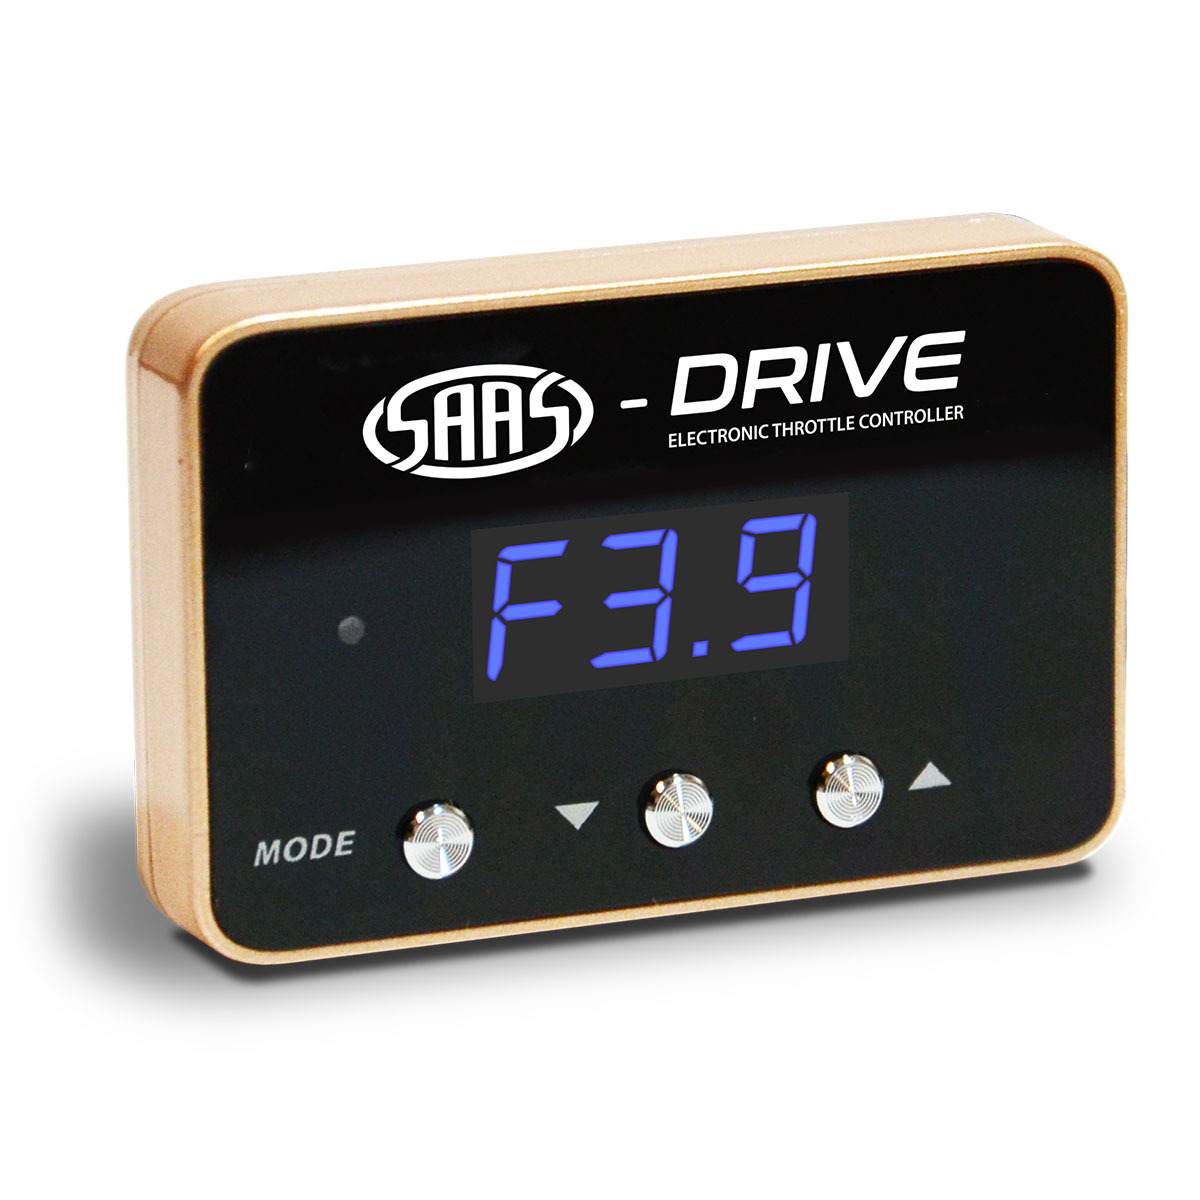 SAAS-Drive Fiat Abarth 500 2007 - 2014 Throttle Controller 